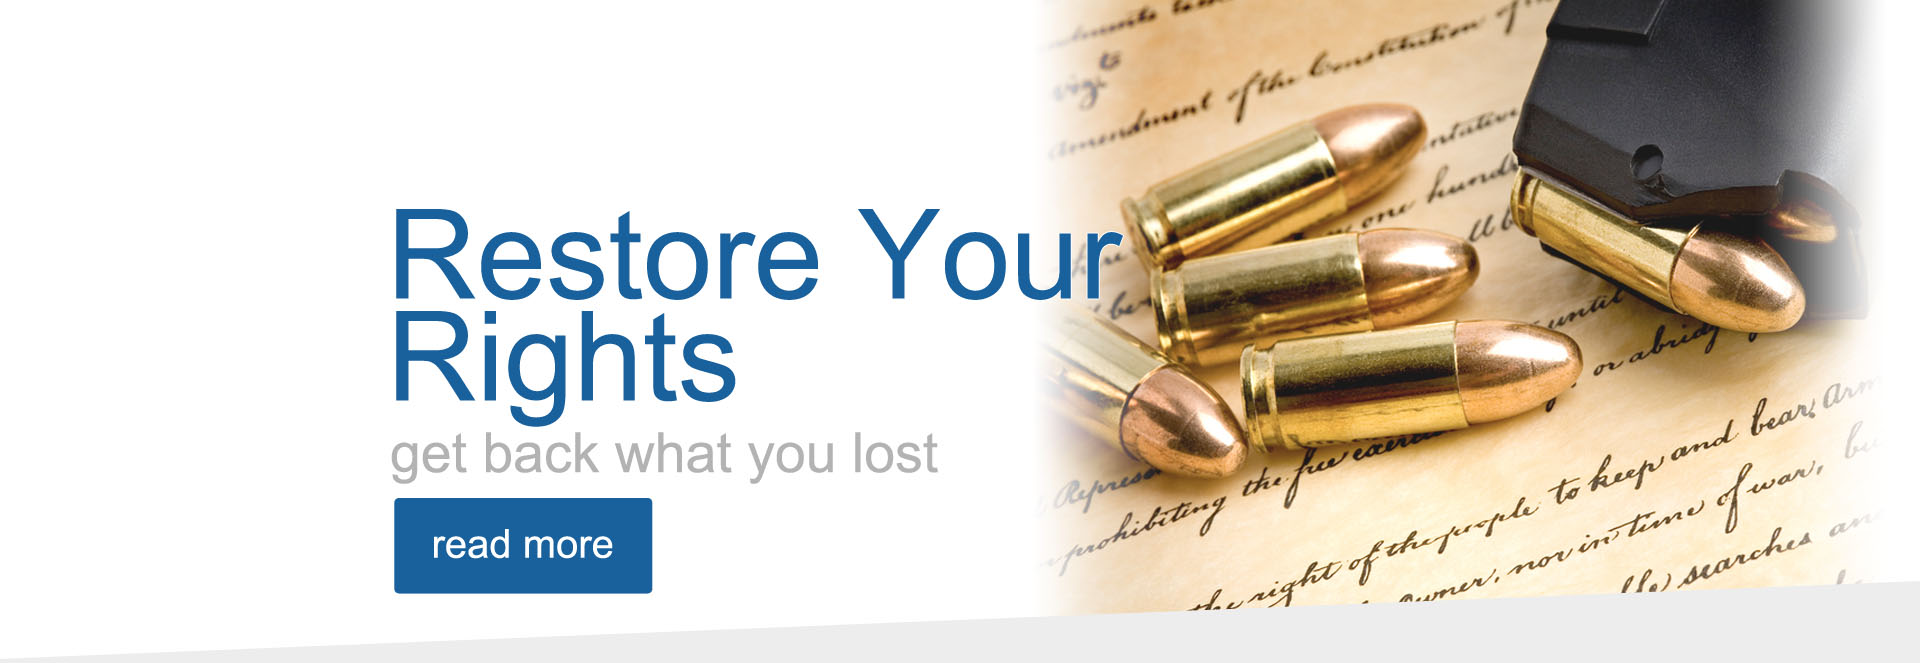 restore your gun rights